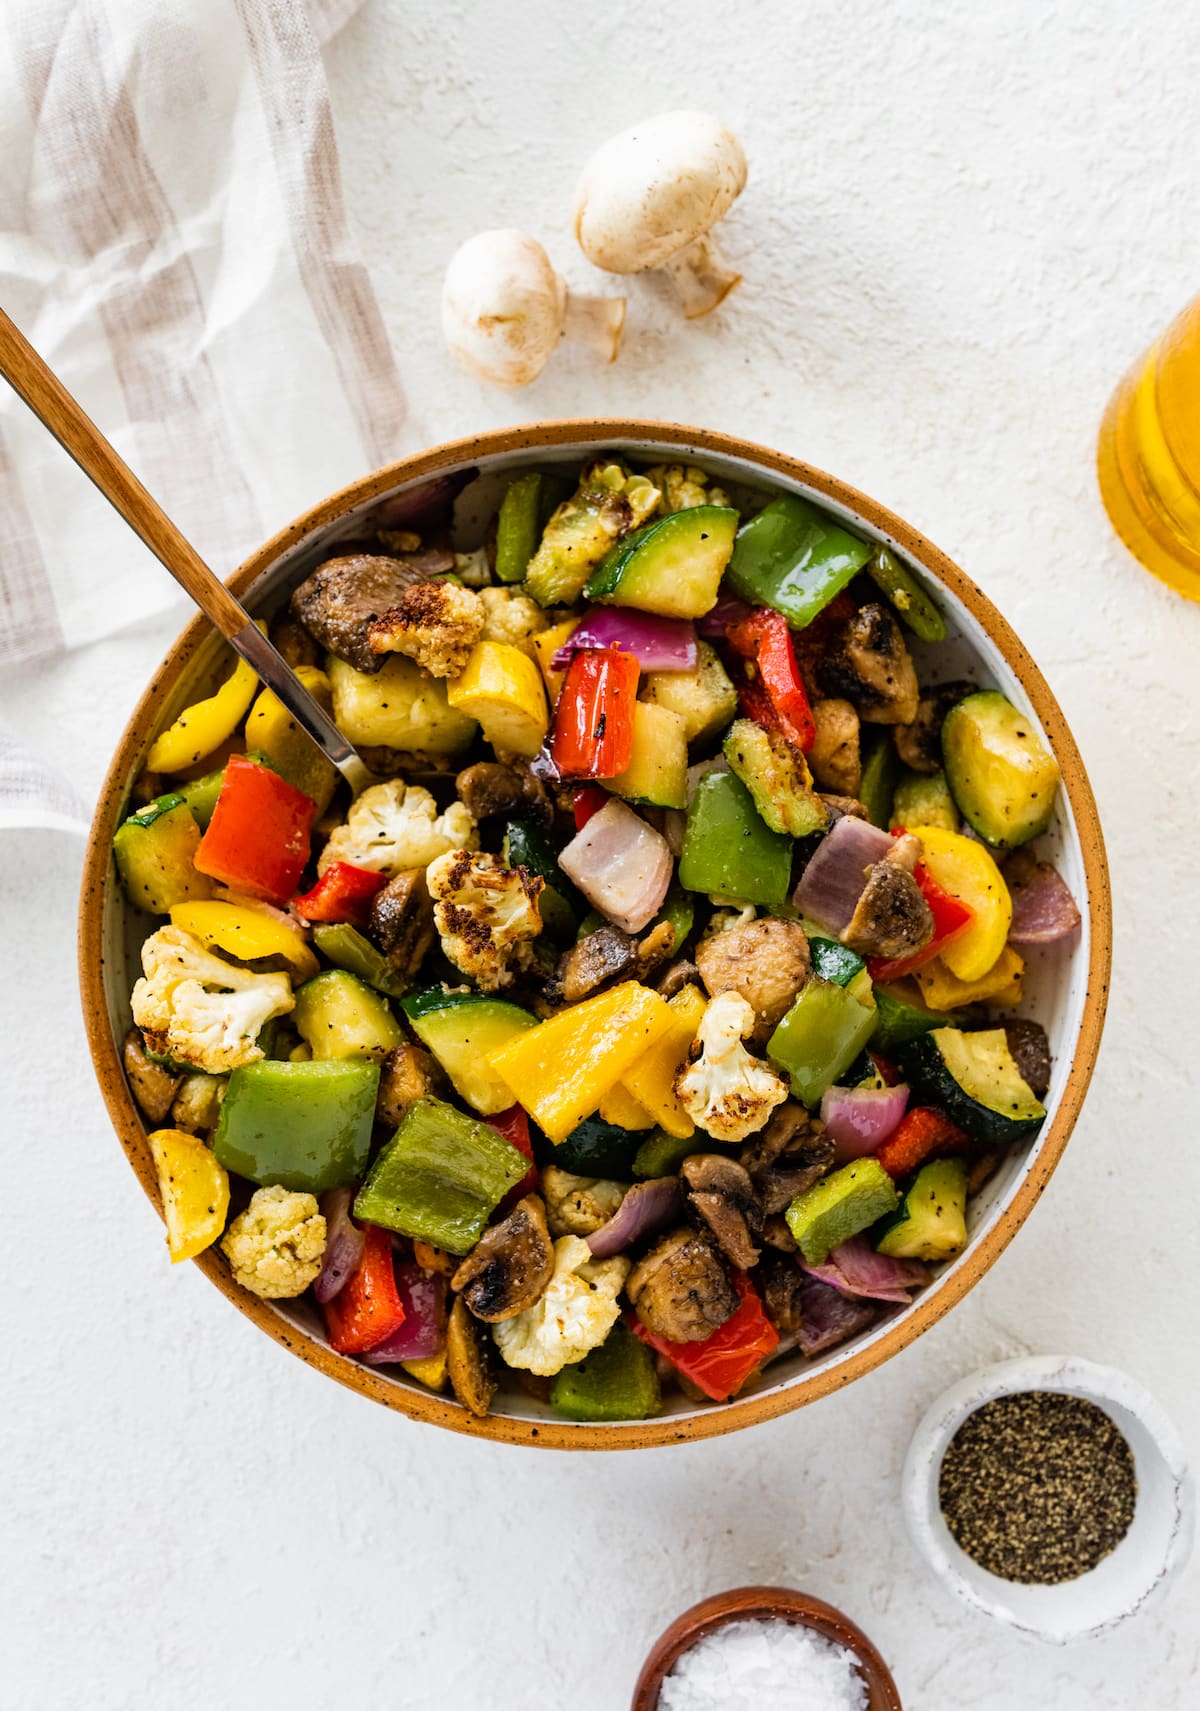 Air-fried vegetables in a bowl. Vegetables include cauliflower, mushroom, onion, zucchini, and bell peppers.